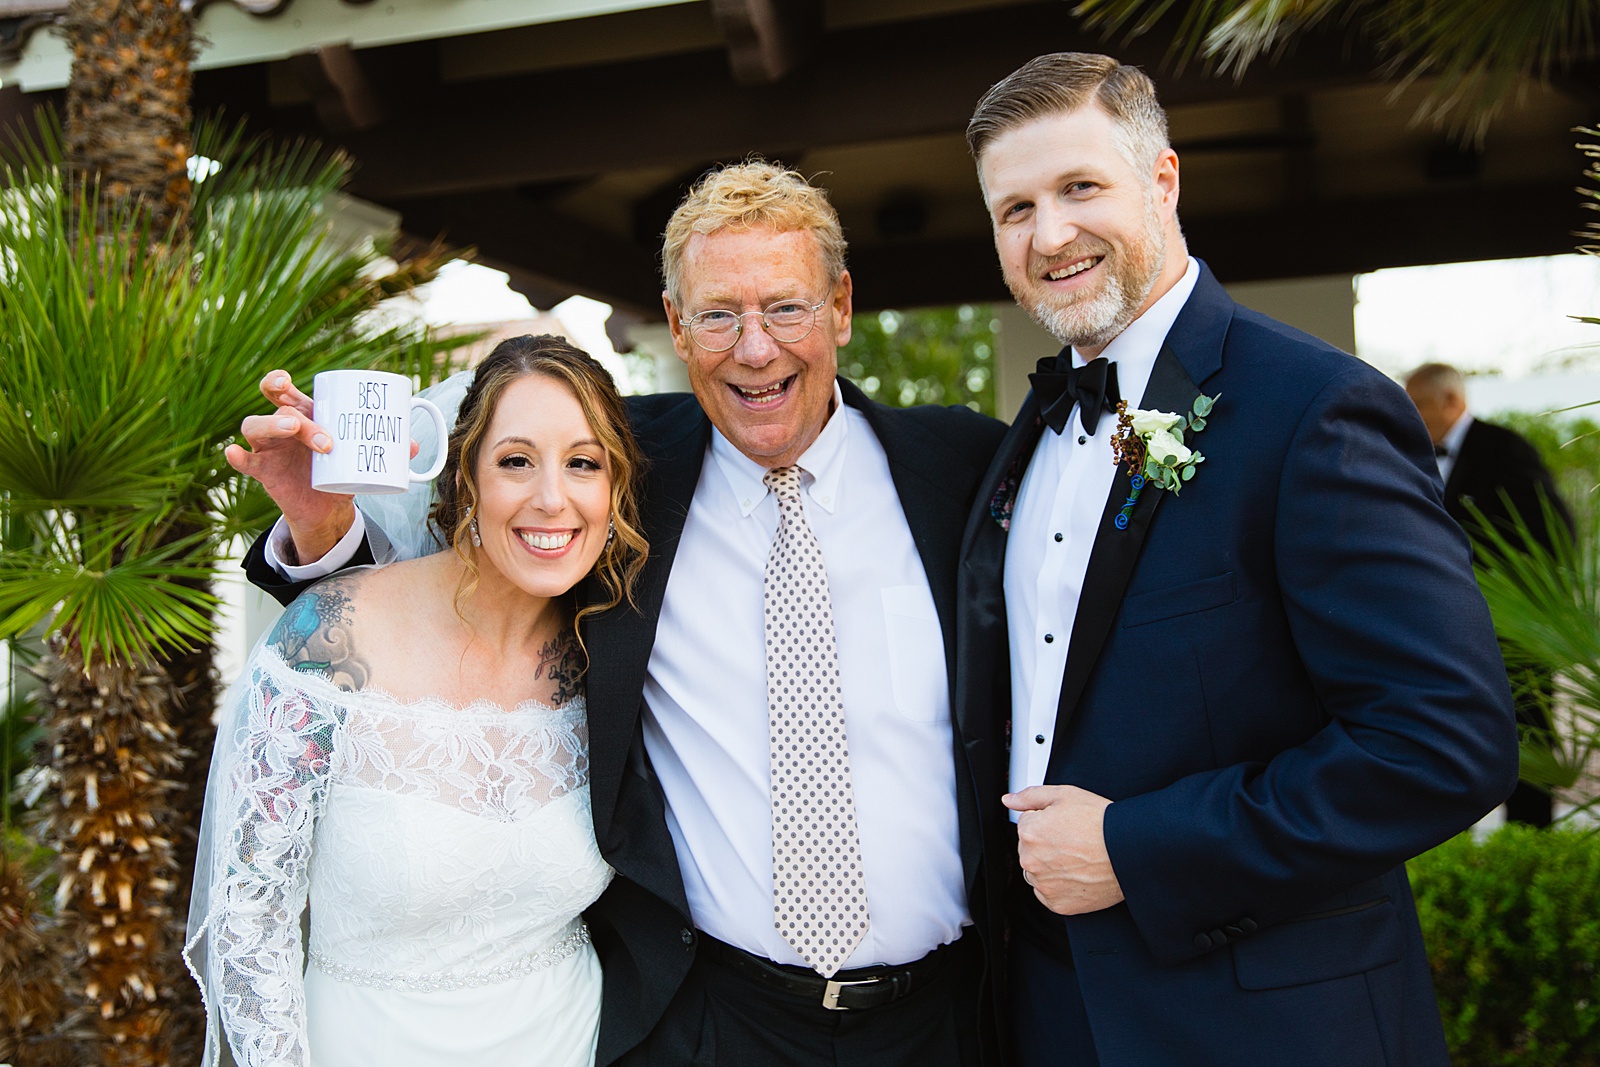 Newlyweds and their Officiant together at backyard wedding reception by Scottsdale wedding photographer PMA Photography